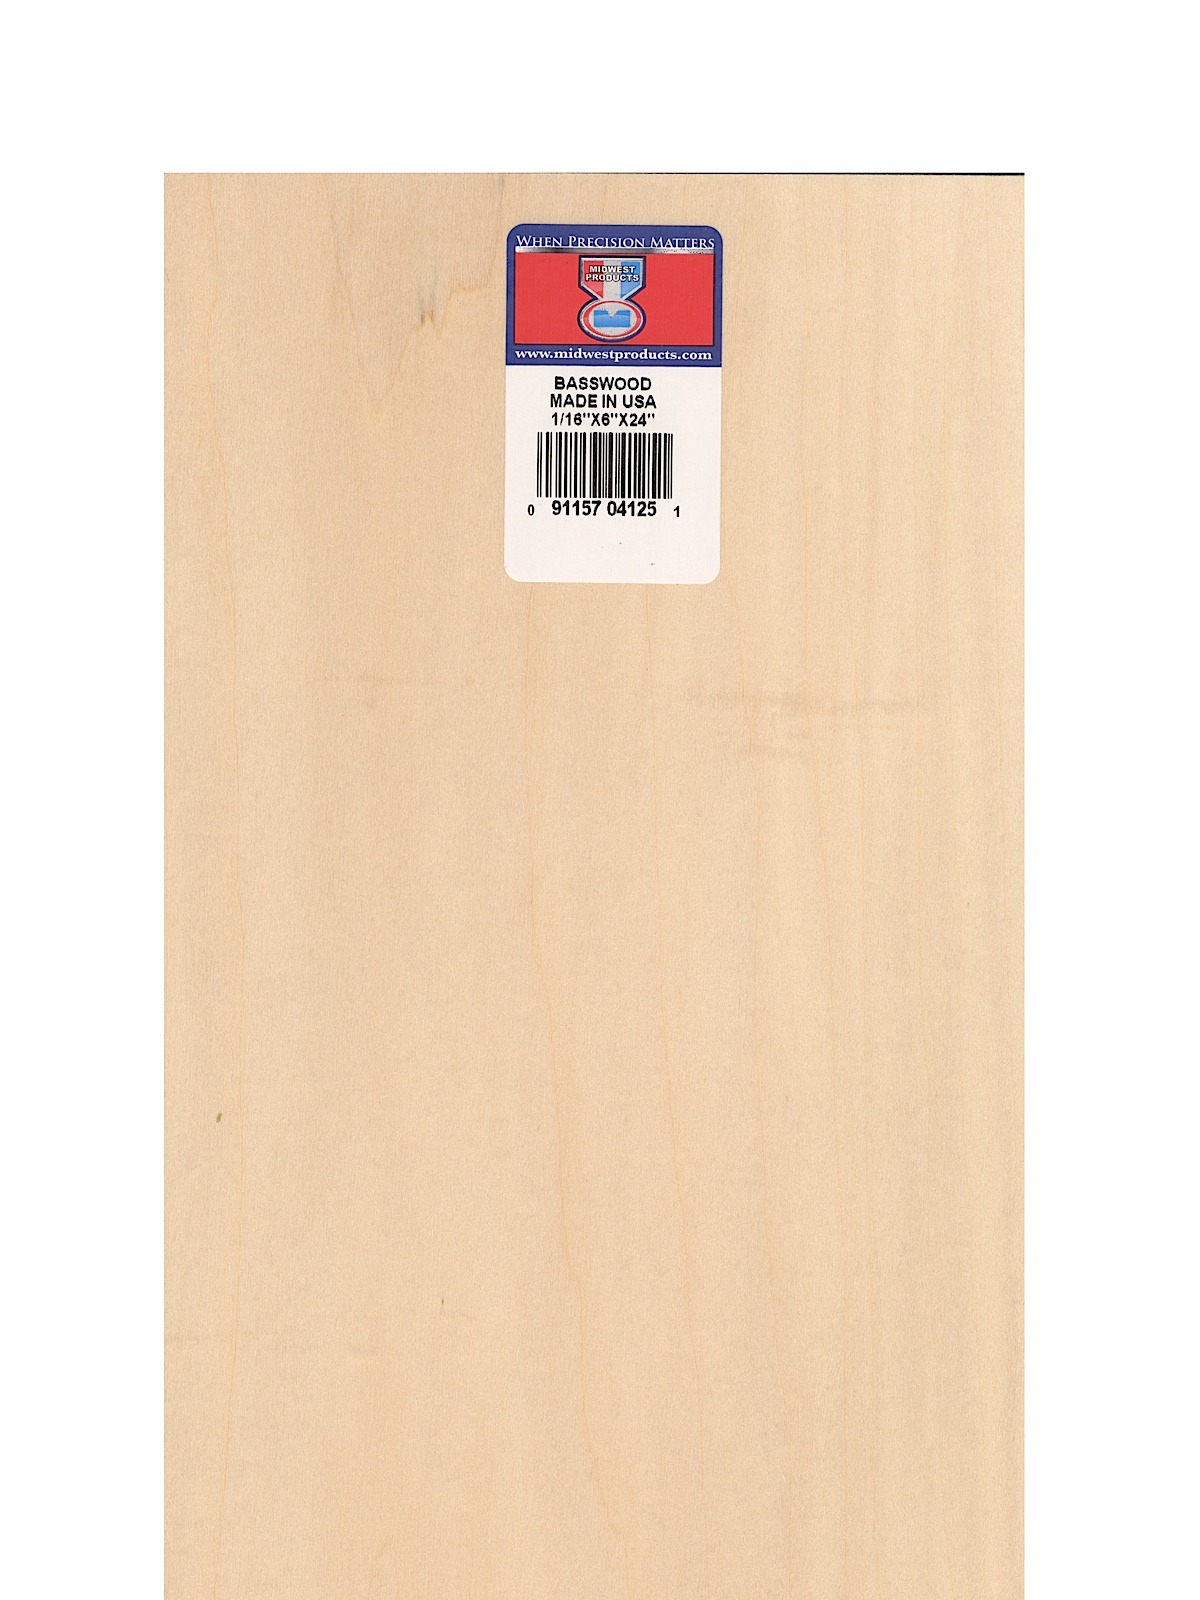 Basswood Sheets 1 16 In. 6 In. X 24 In.